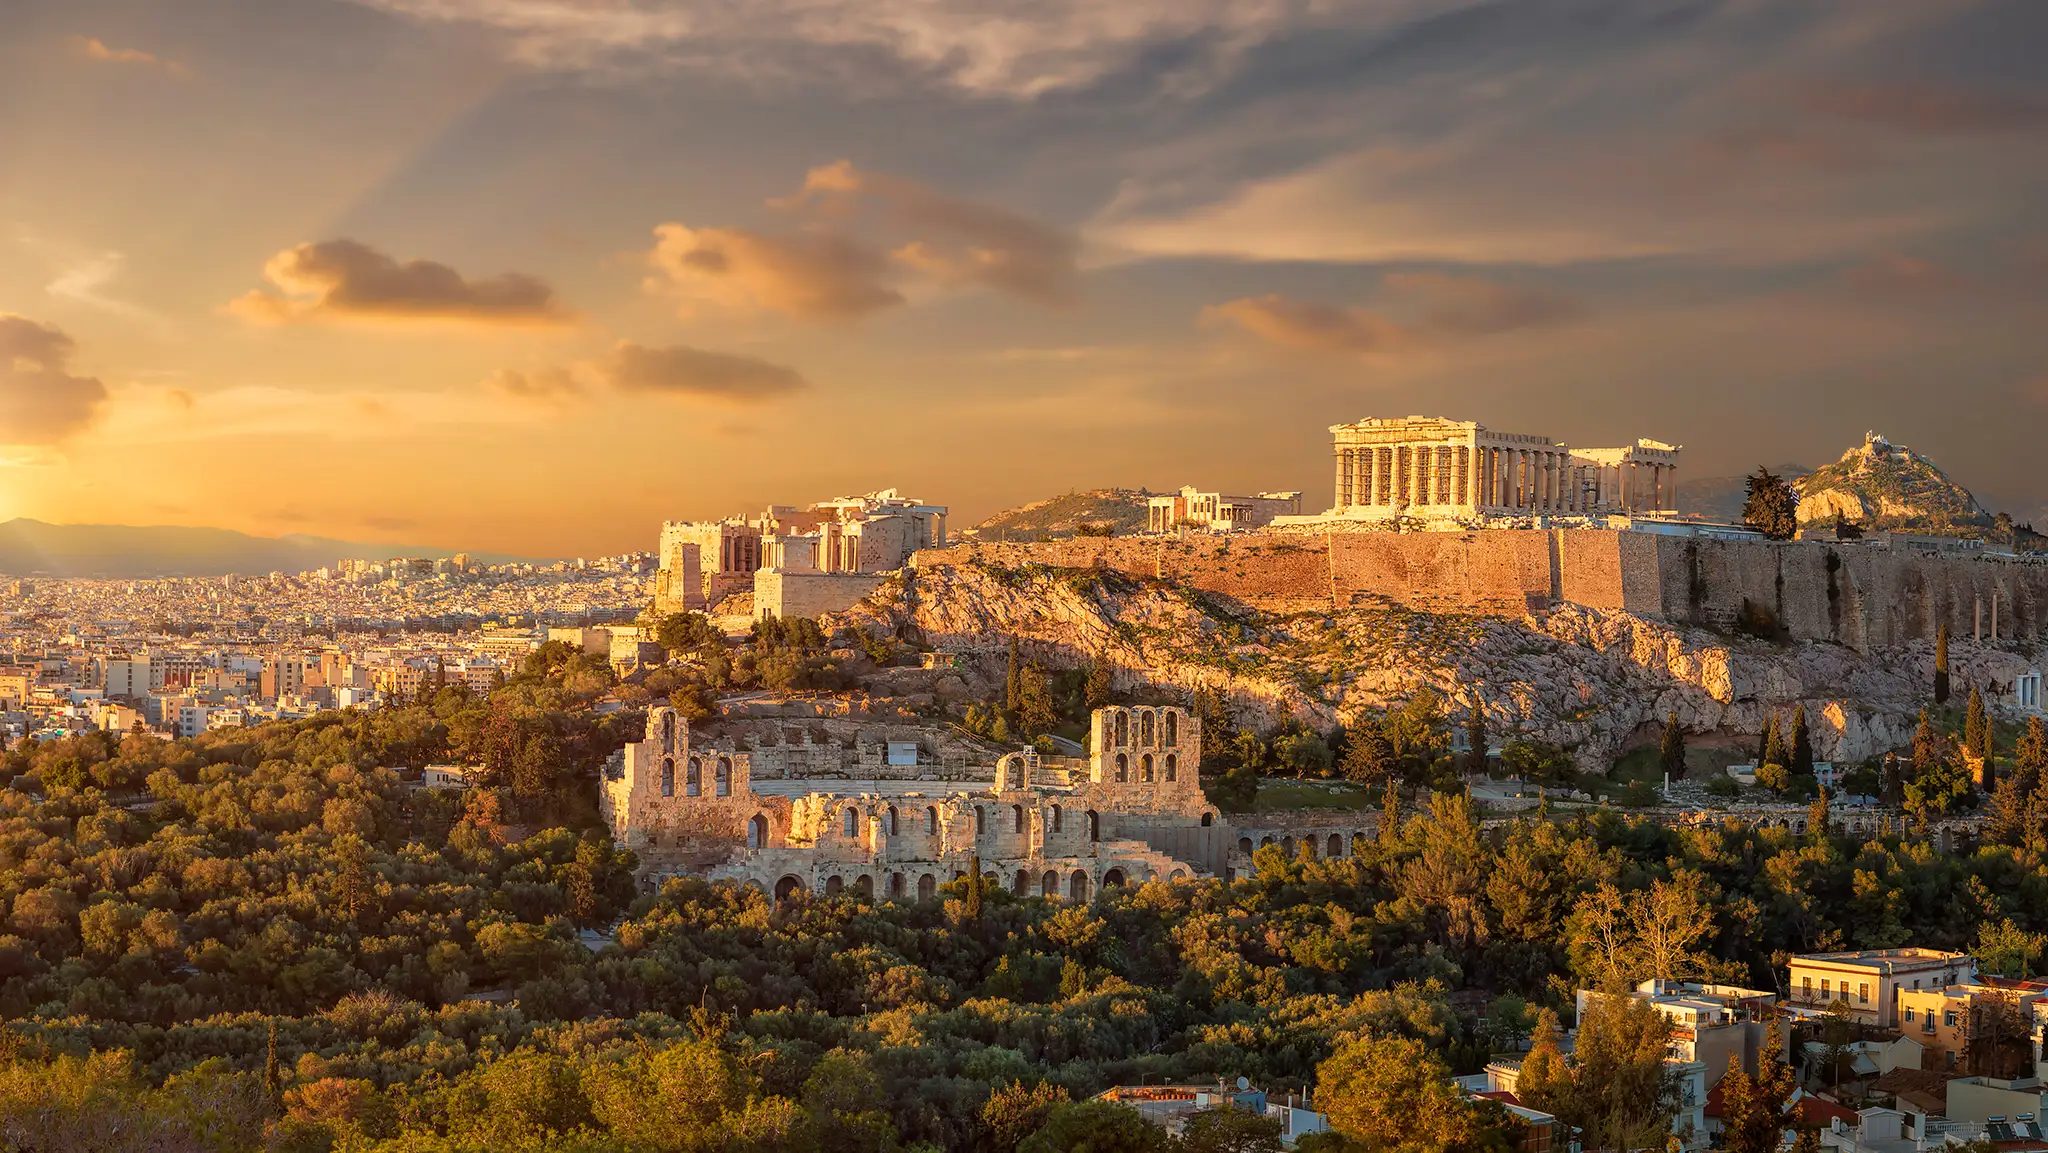 Akropolis of Athens at sunset.